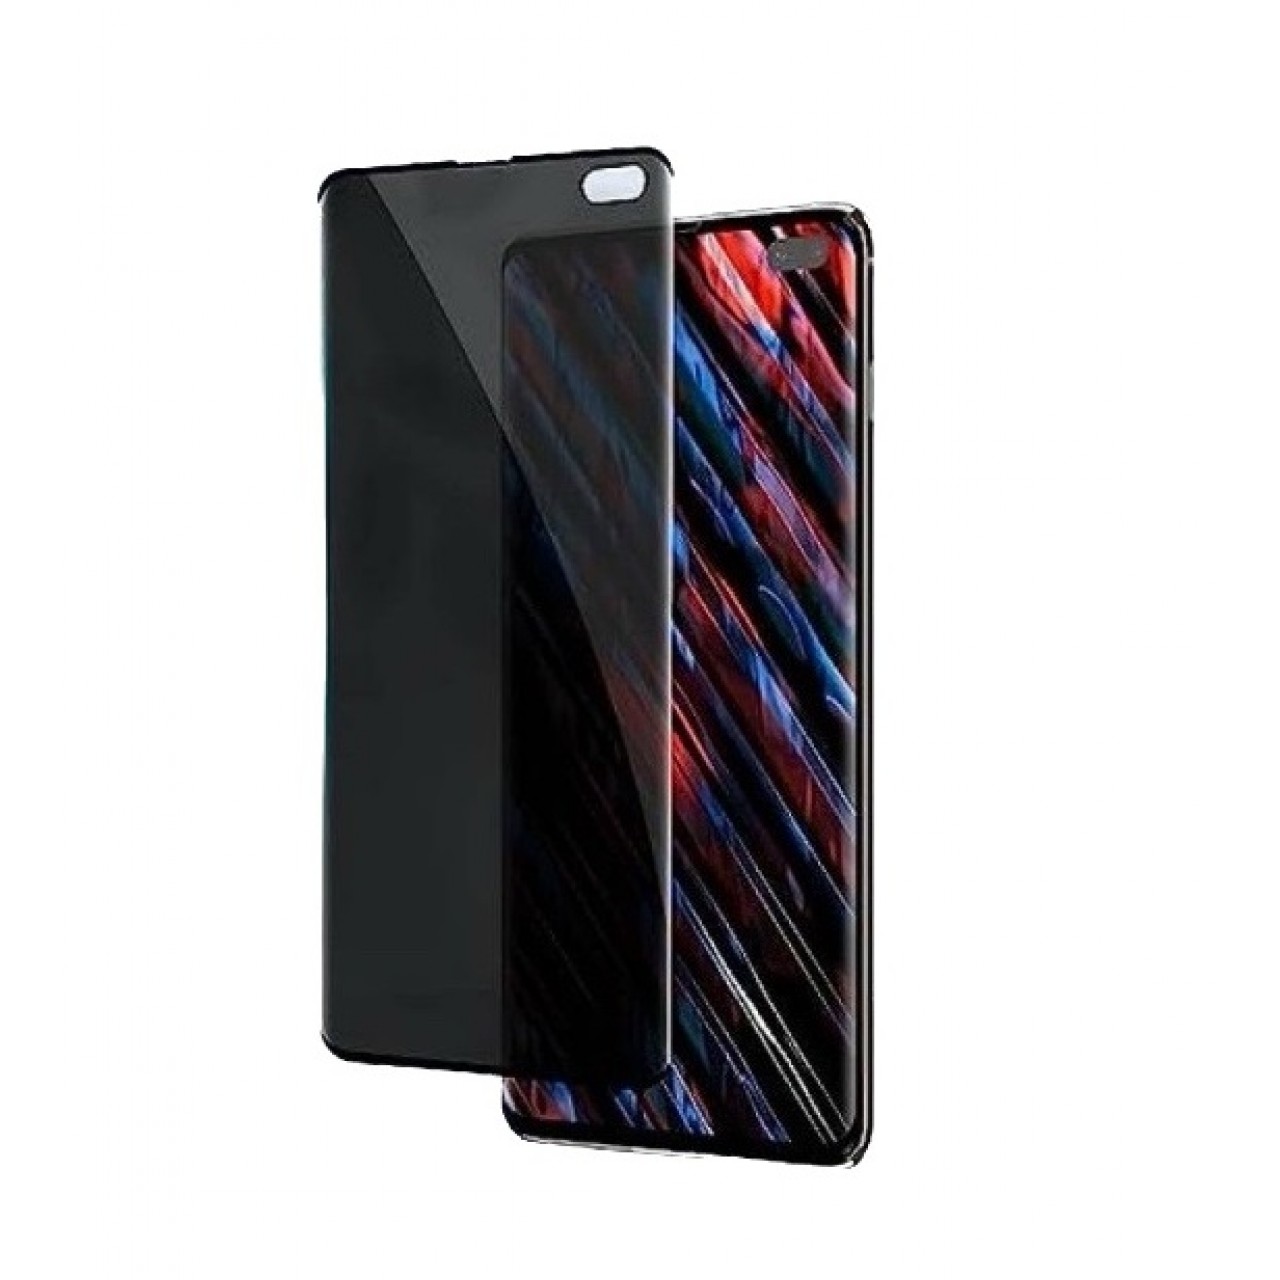 Samsung Galaxy S10 Plus Privacy Full Tempered Glass Screen Protector - Απόρρητη Προστασία Οθόνης Φιμέ